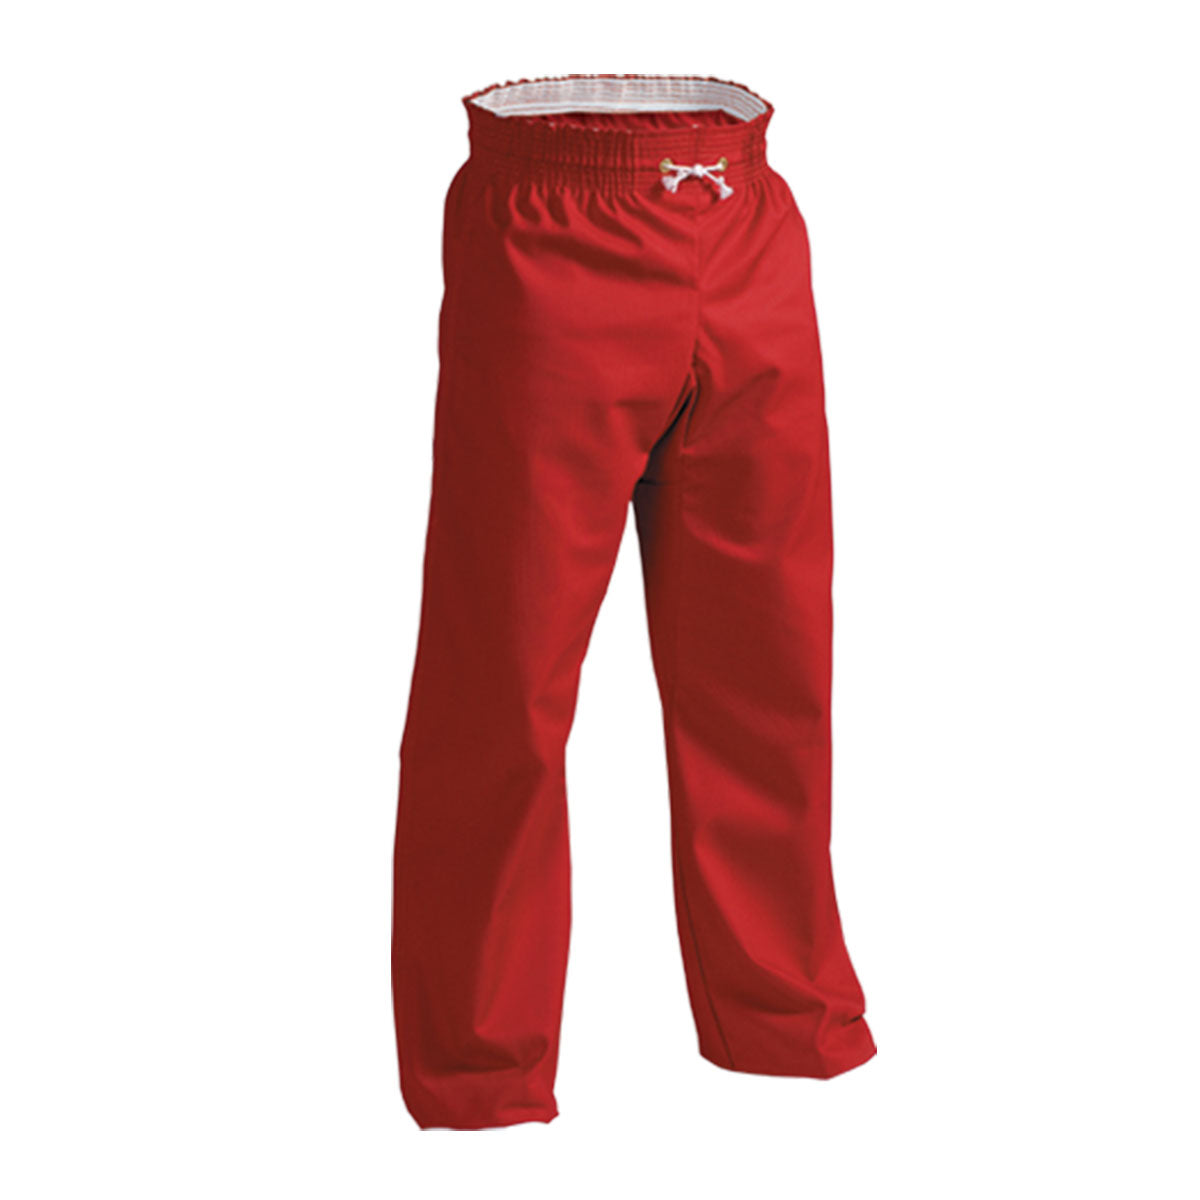 8 oz. Middleweight Contact Pants, Century Martial Arts Canada